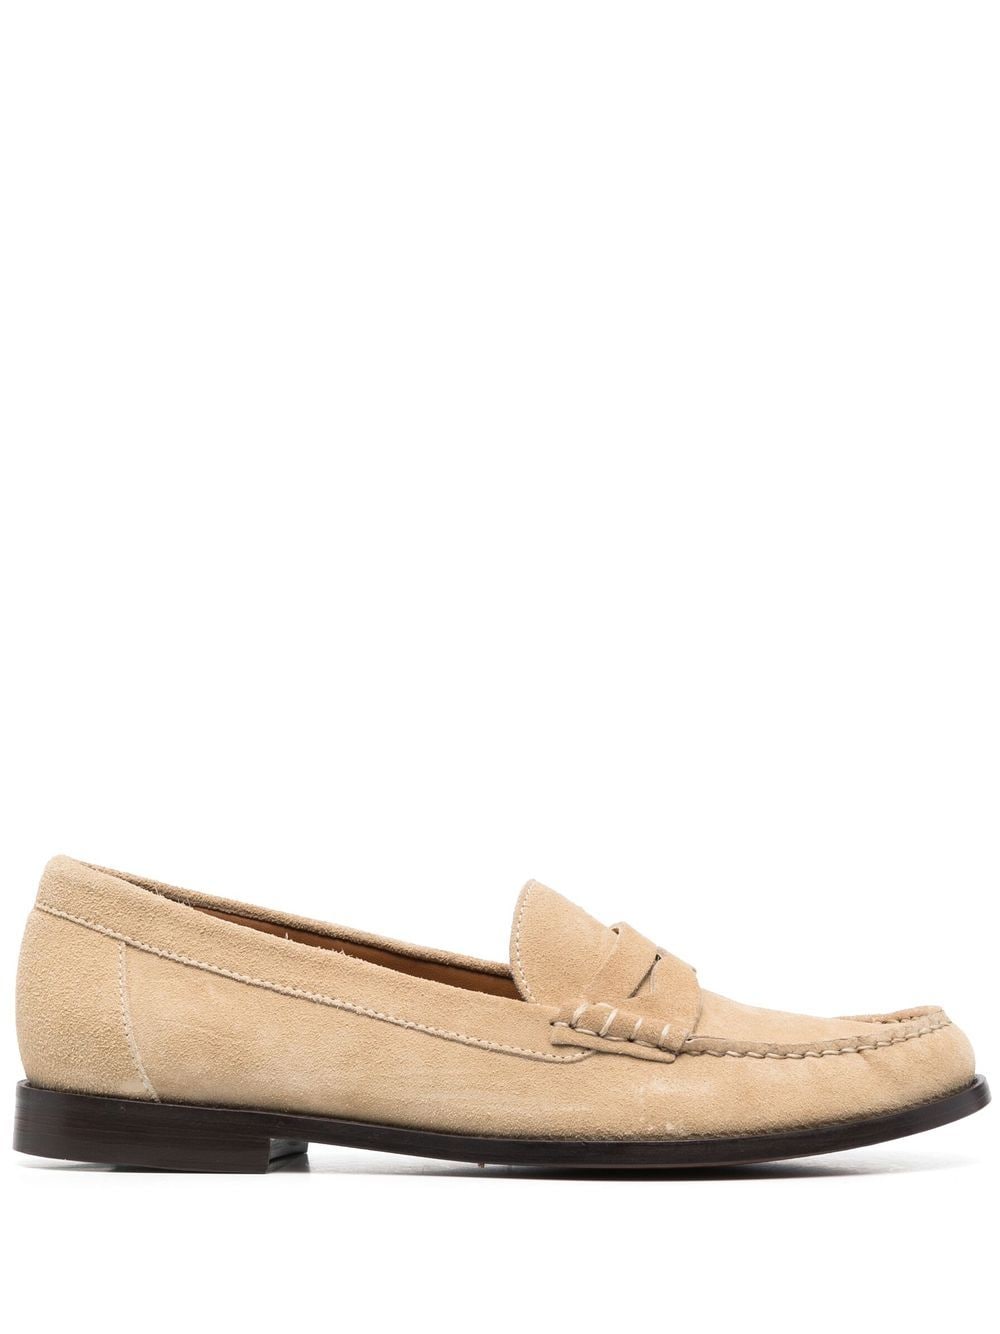 leather penny slot loafers